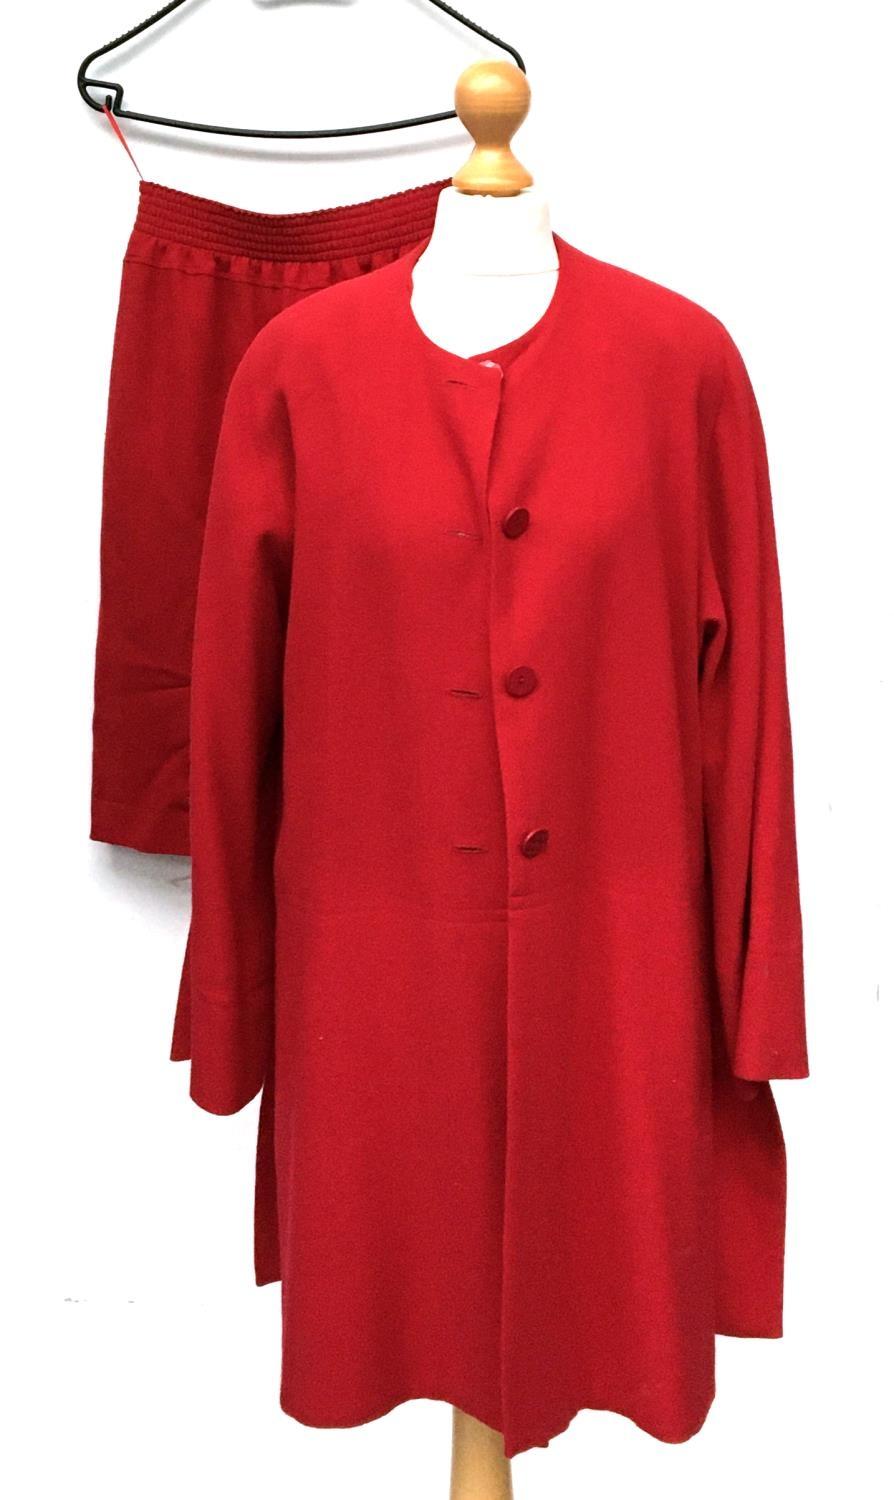 A Jean Muir red wool jacket and skirt, size 10 - Image 2 of 2